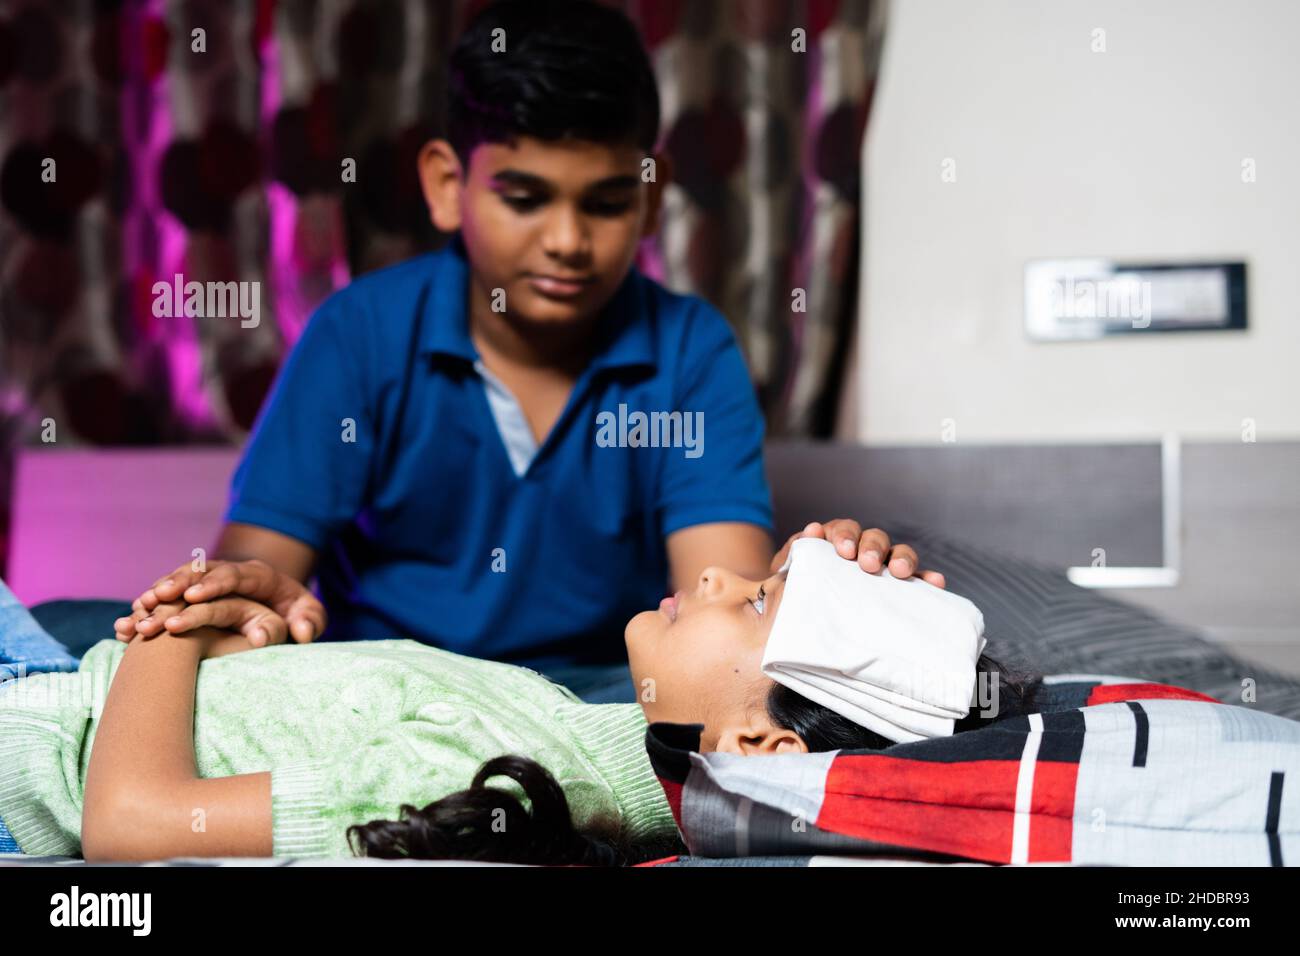 Brother helping by placing cold water cloth on sick sisters forehead due to fever - concept showing childhood sibling caring, relationship and bonding Stock Photo